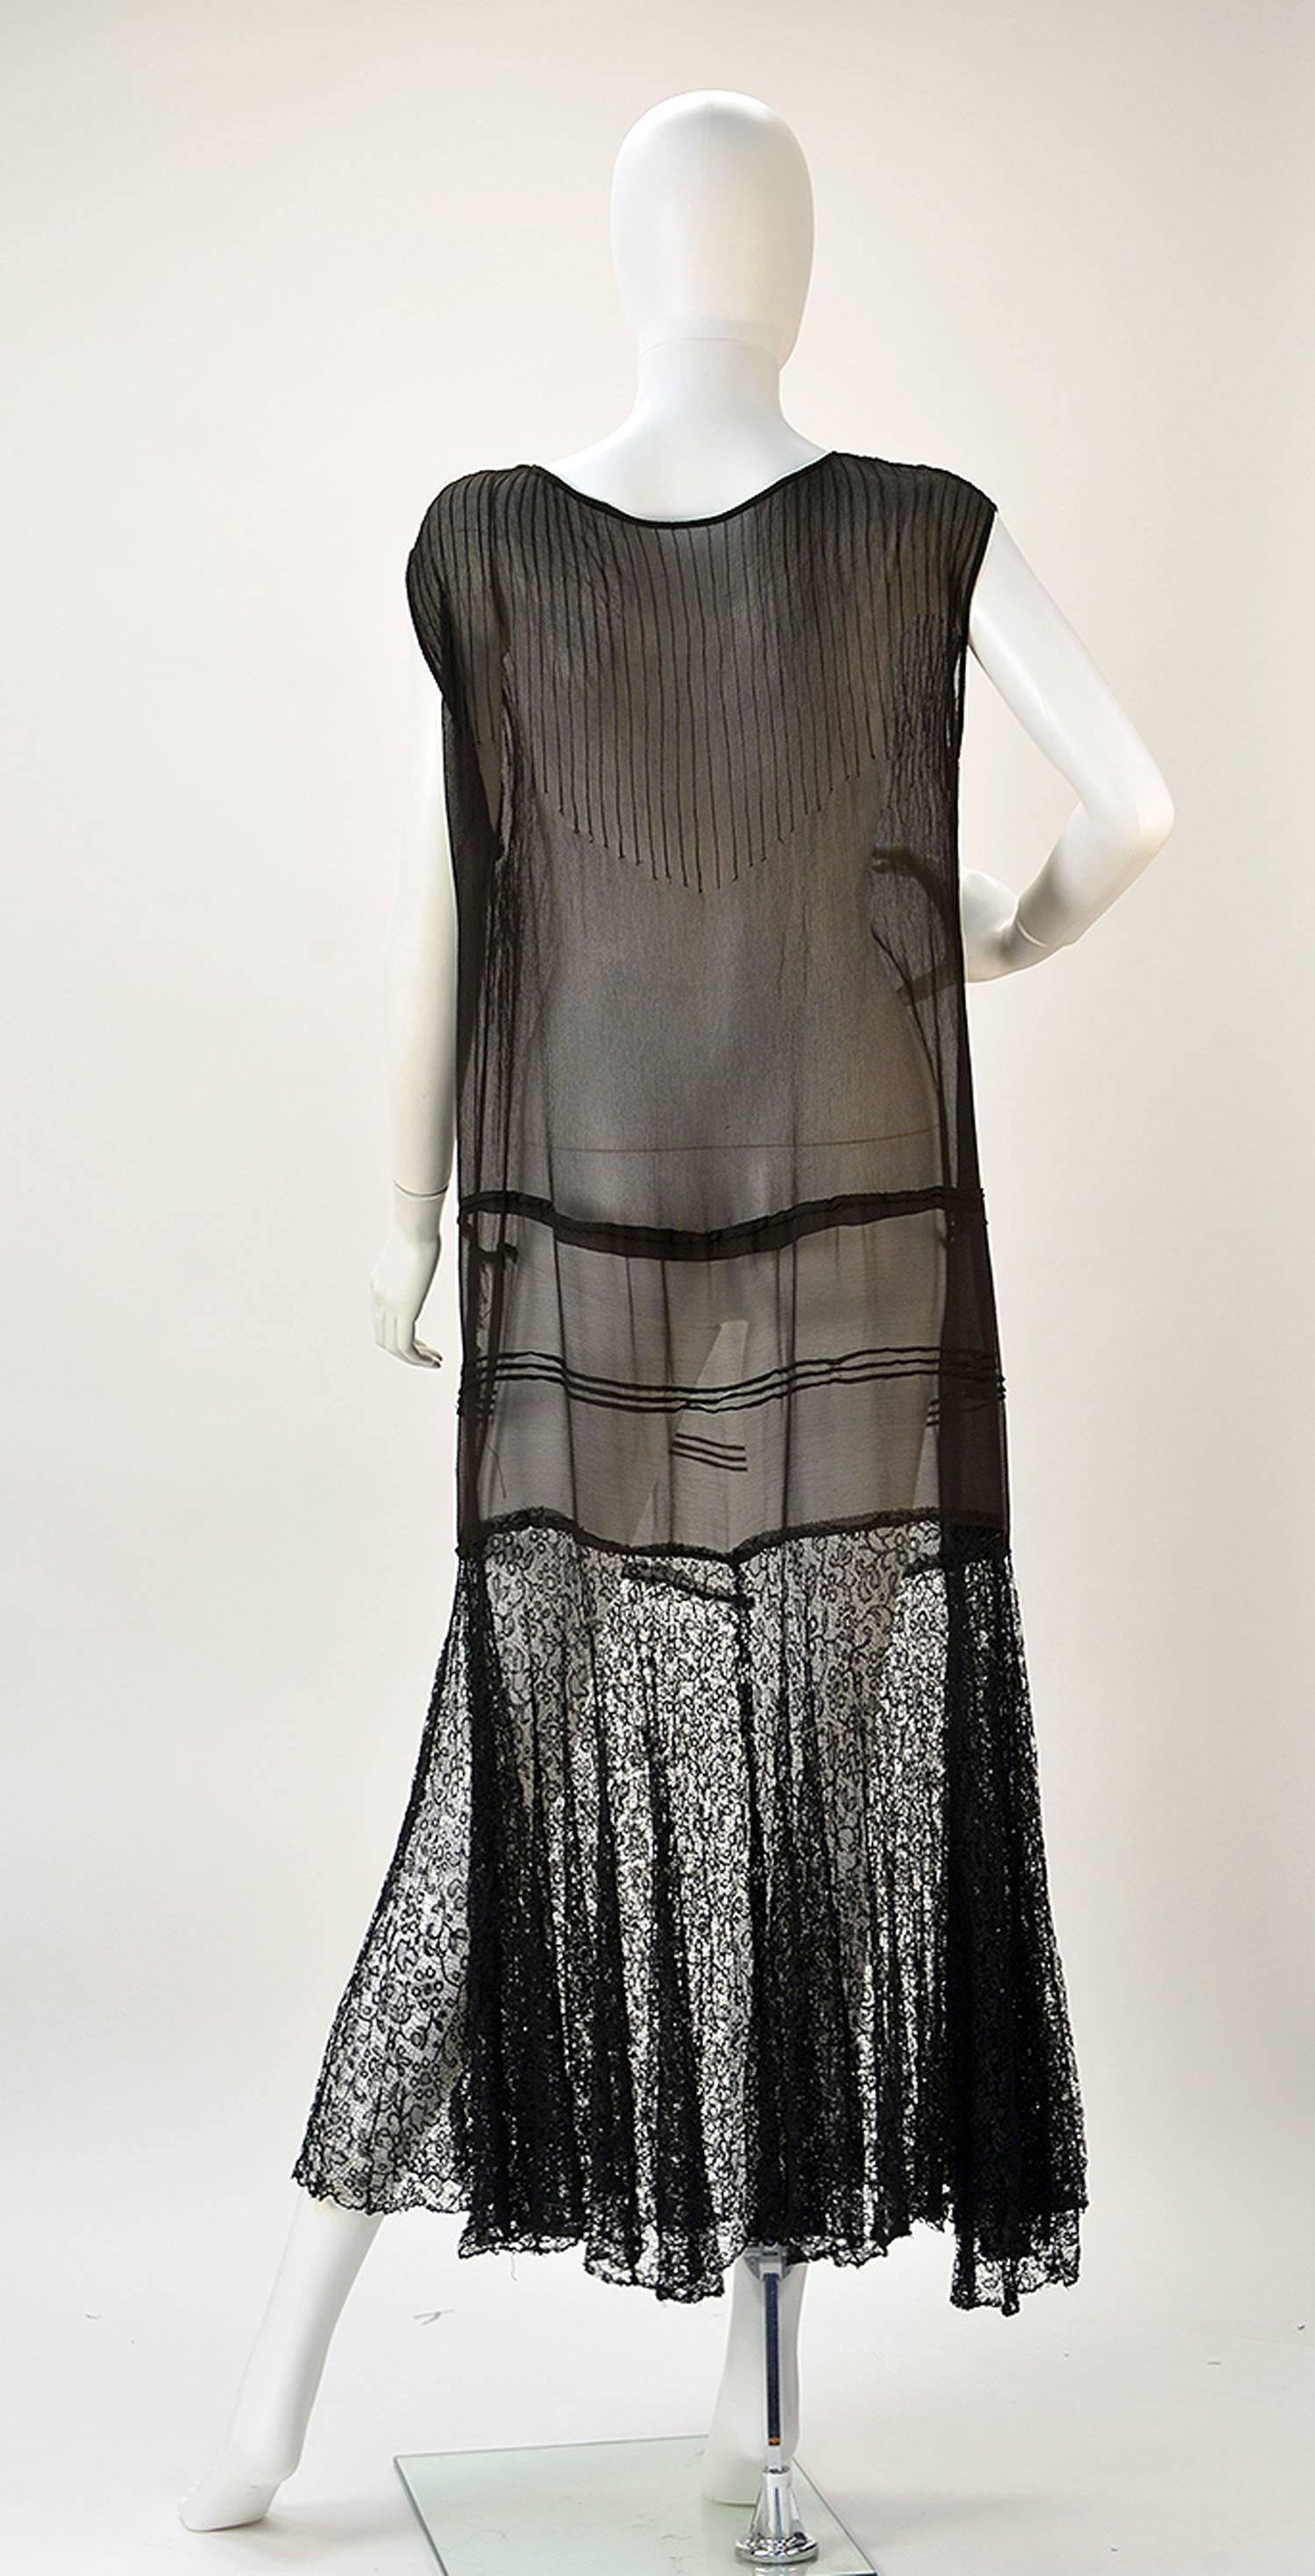 Delicate and wonderful, this sheer almost antique dress from the 1920's is a pure dream. 

Dress has stitching running from neck and shoulder to mid dress, mimicking pleats. One seam runs along the waist, while three run below it giving the dress